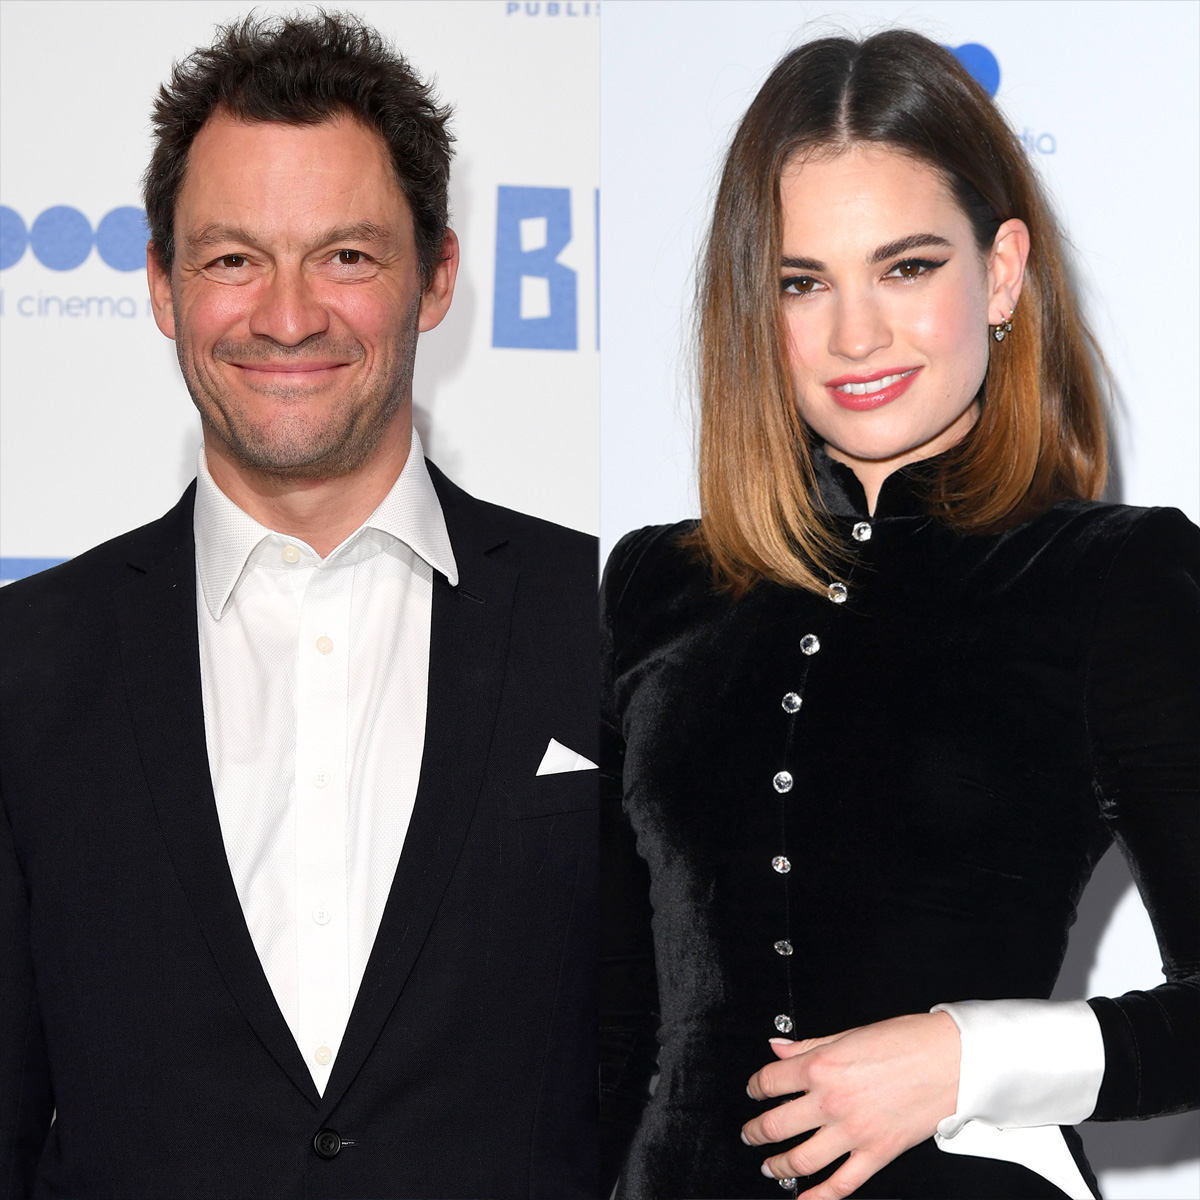 Dominic West S Wife Reflects On Ups And Downs After Lily James Drama E Online Deutschland